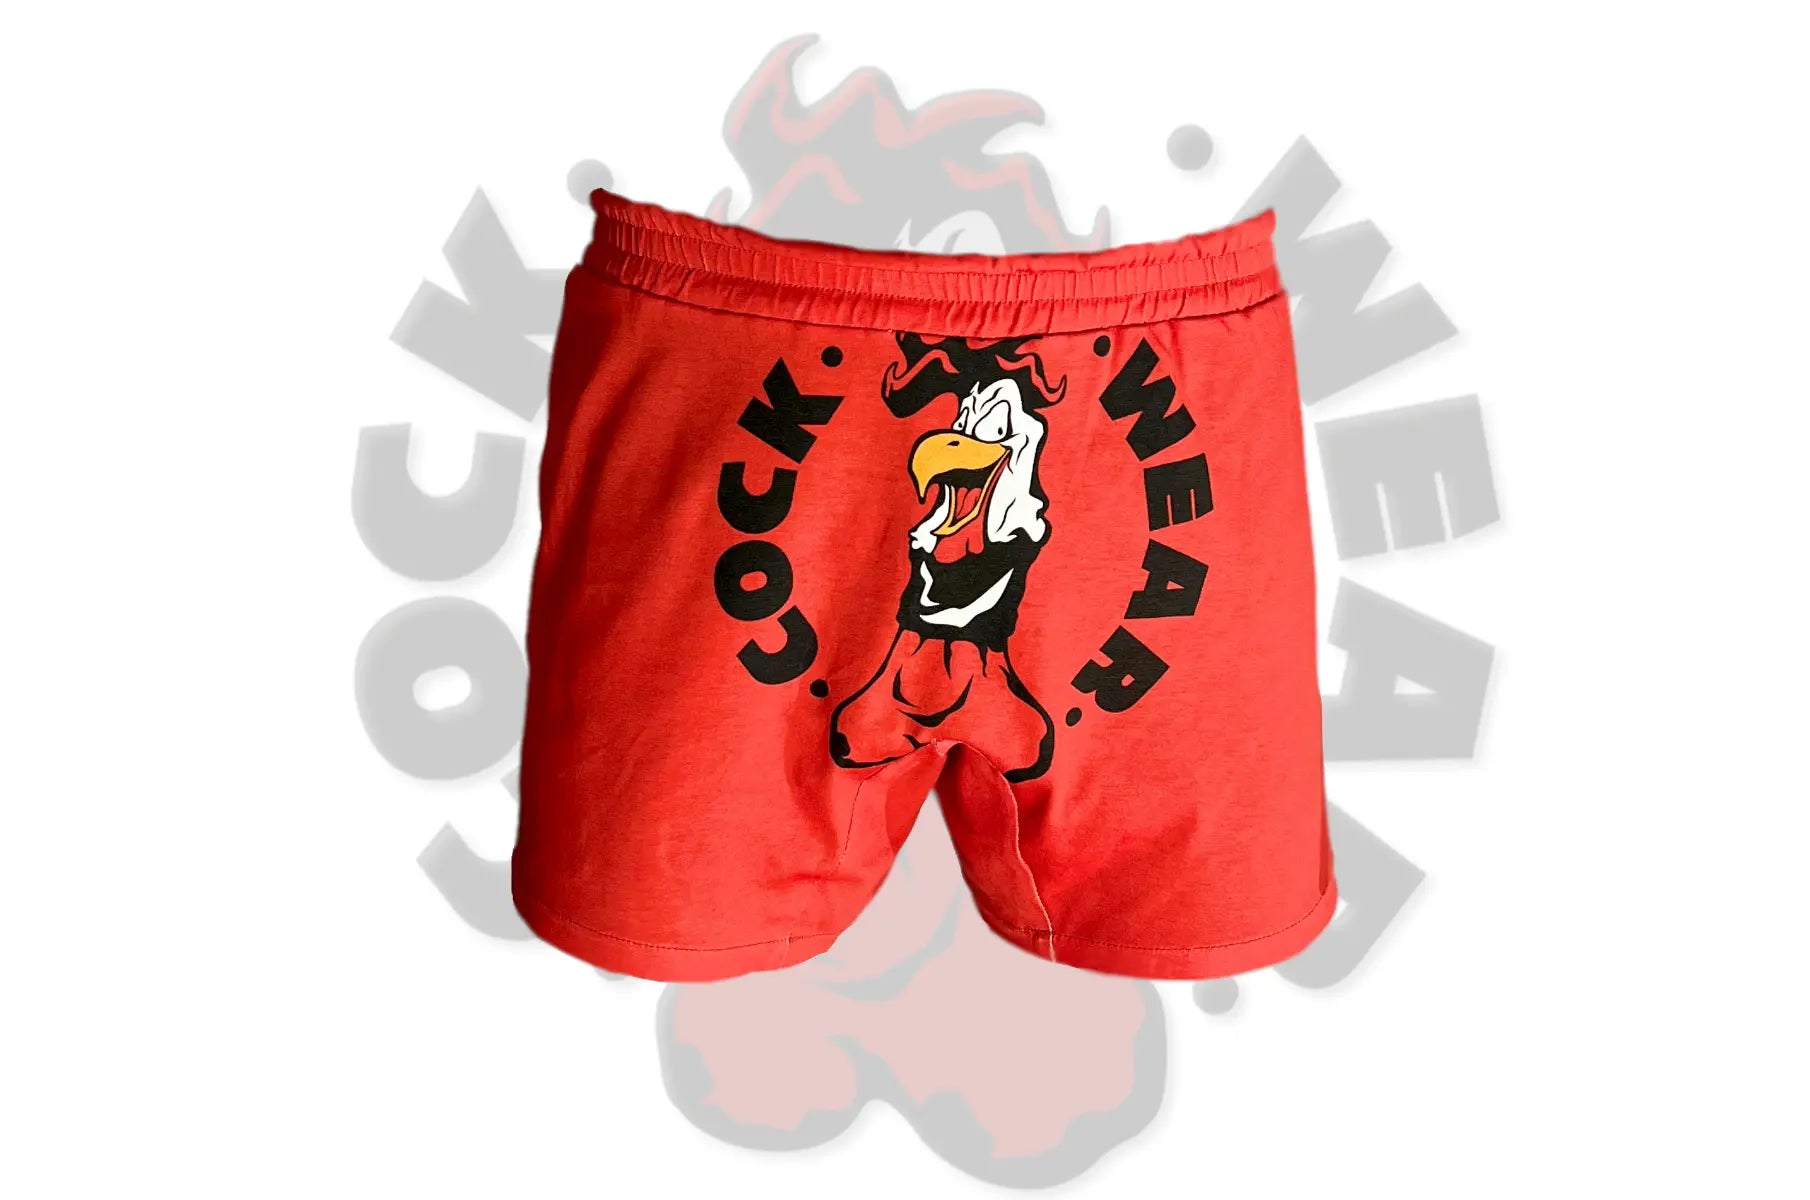 RED COCK WEAR™ BOXER SHORTS